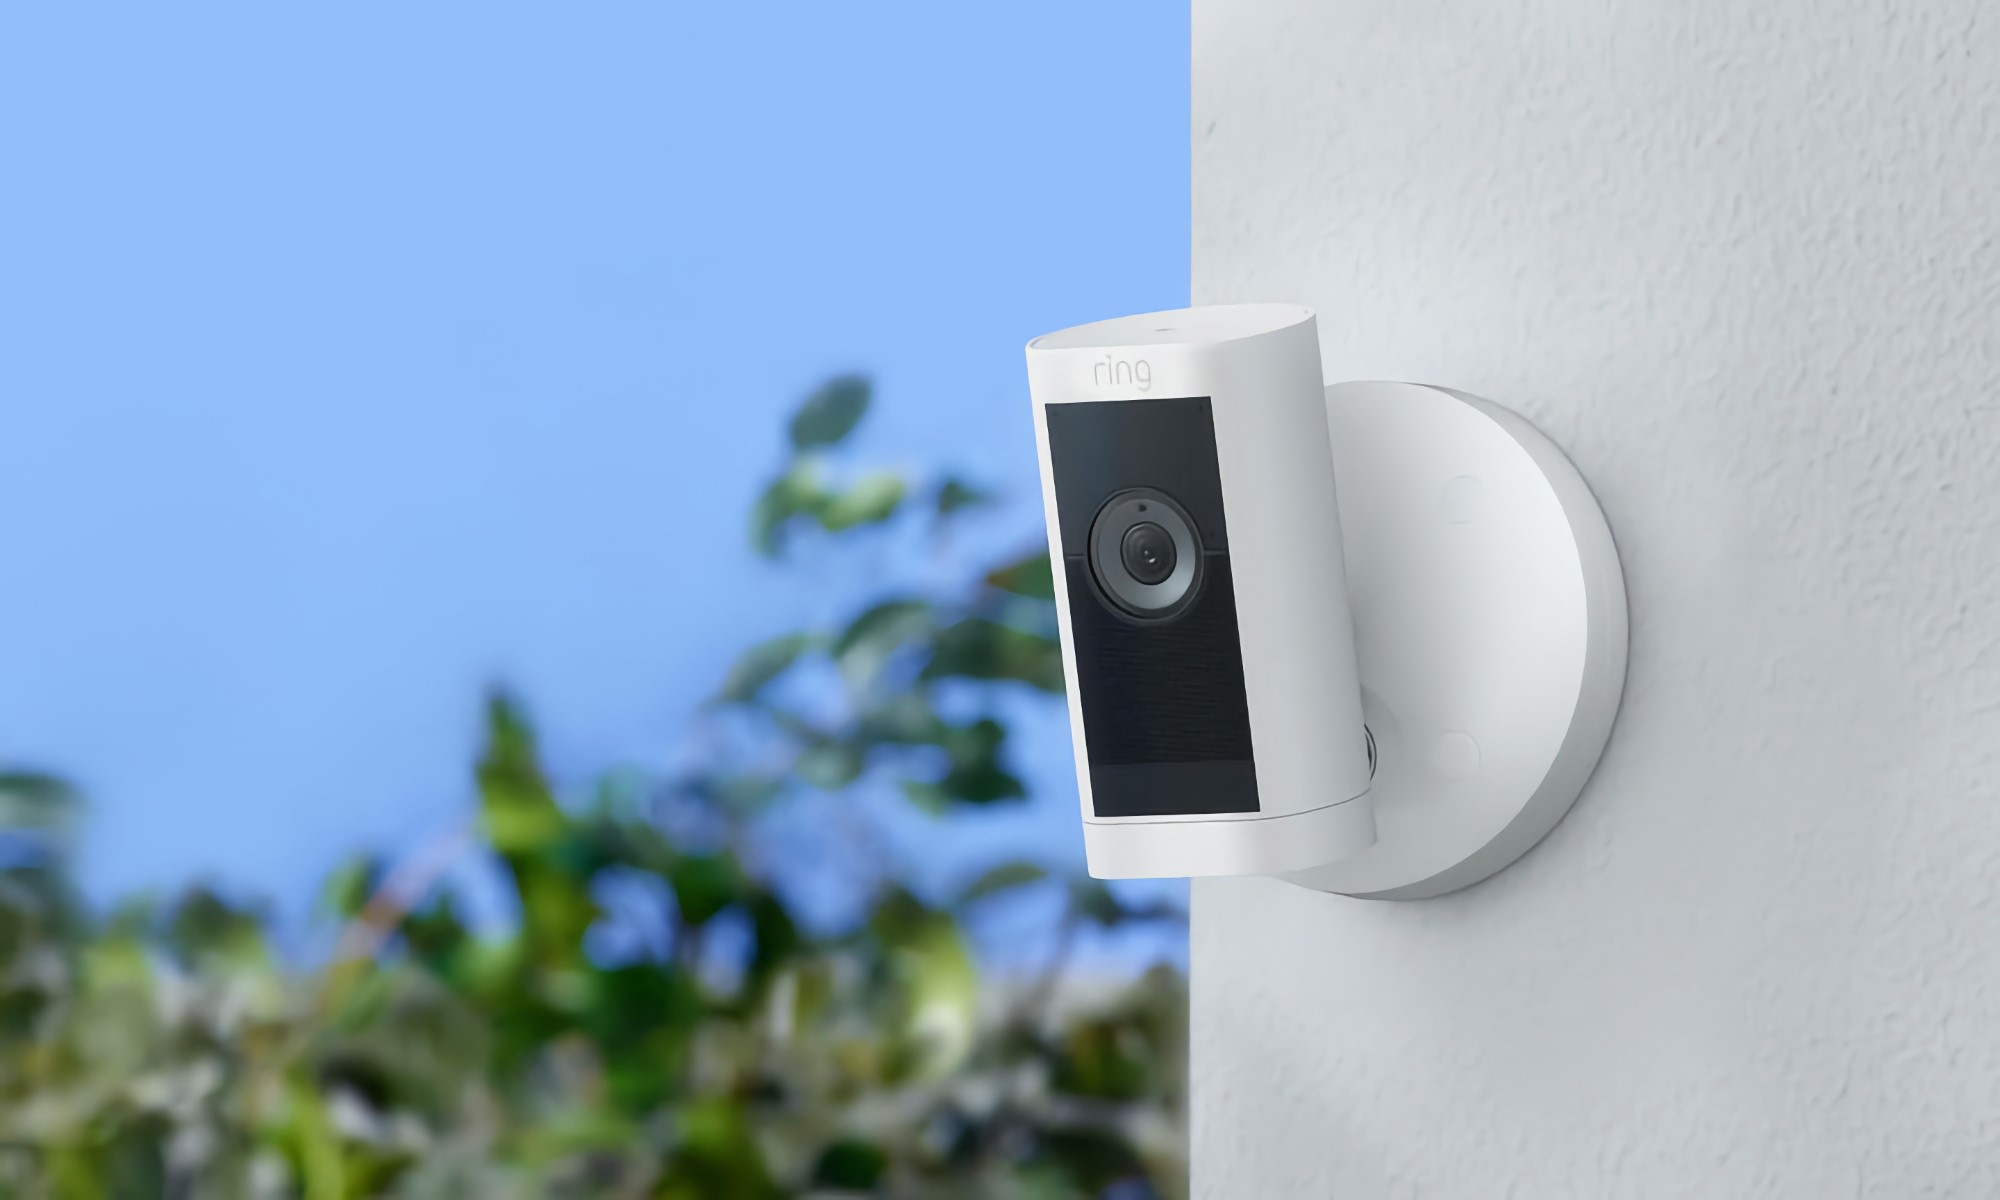 Amazon product photo of the Ring Stick Up Cam Pro. The security camera has a white body and black area near its lens. It's mounted on an outdoor stucco wall with blue sky and green trees visible on the blurred background. | DeviceDaily.com